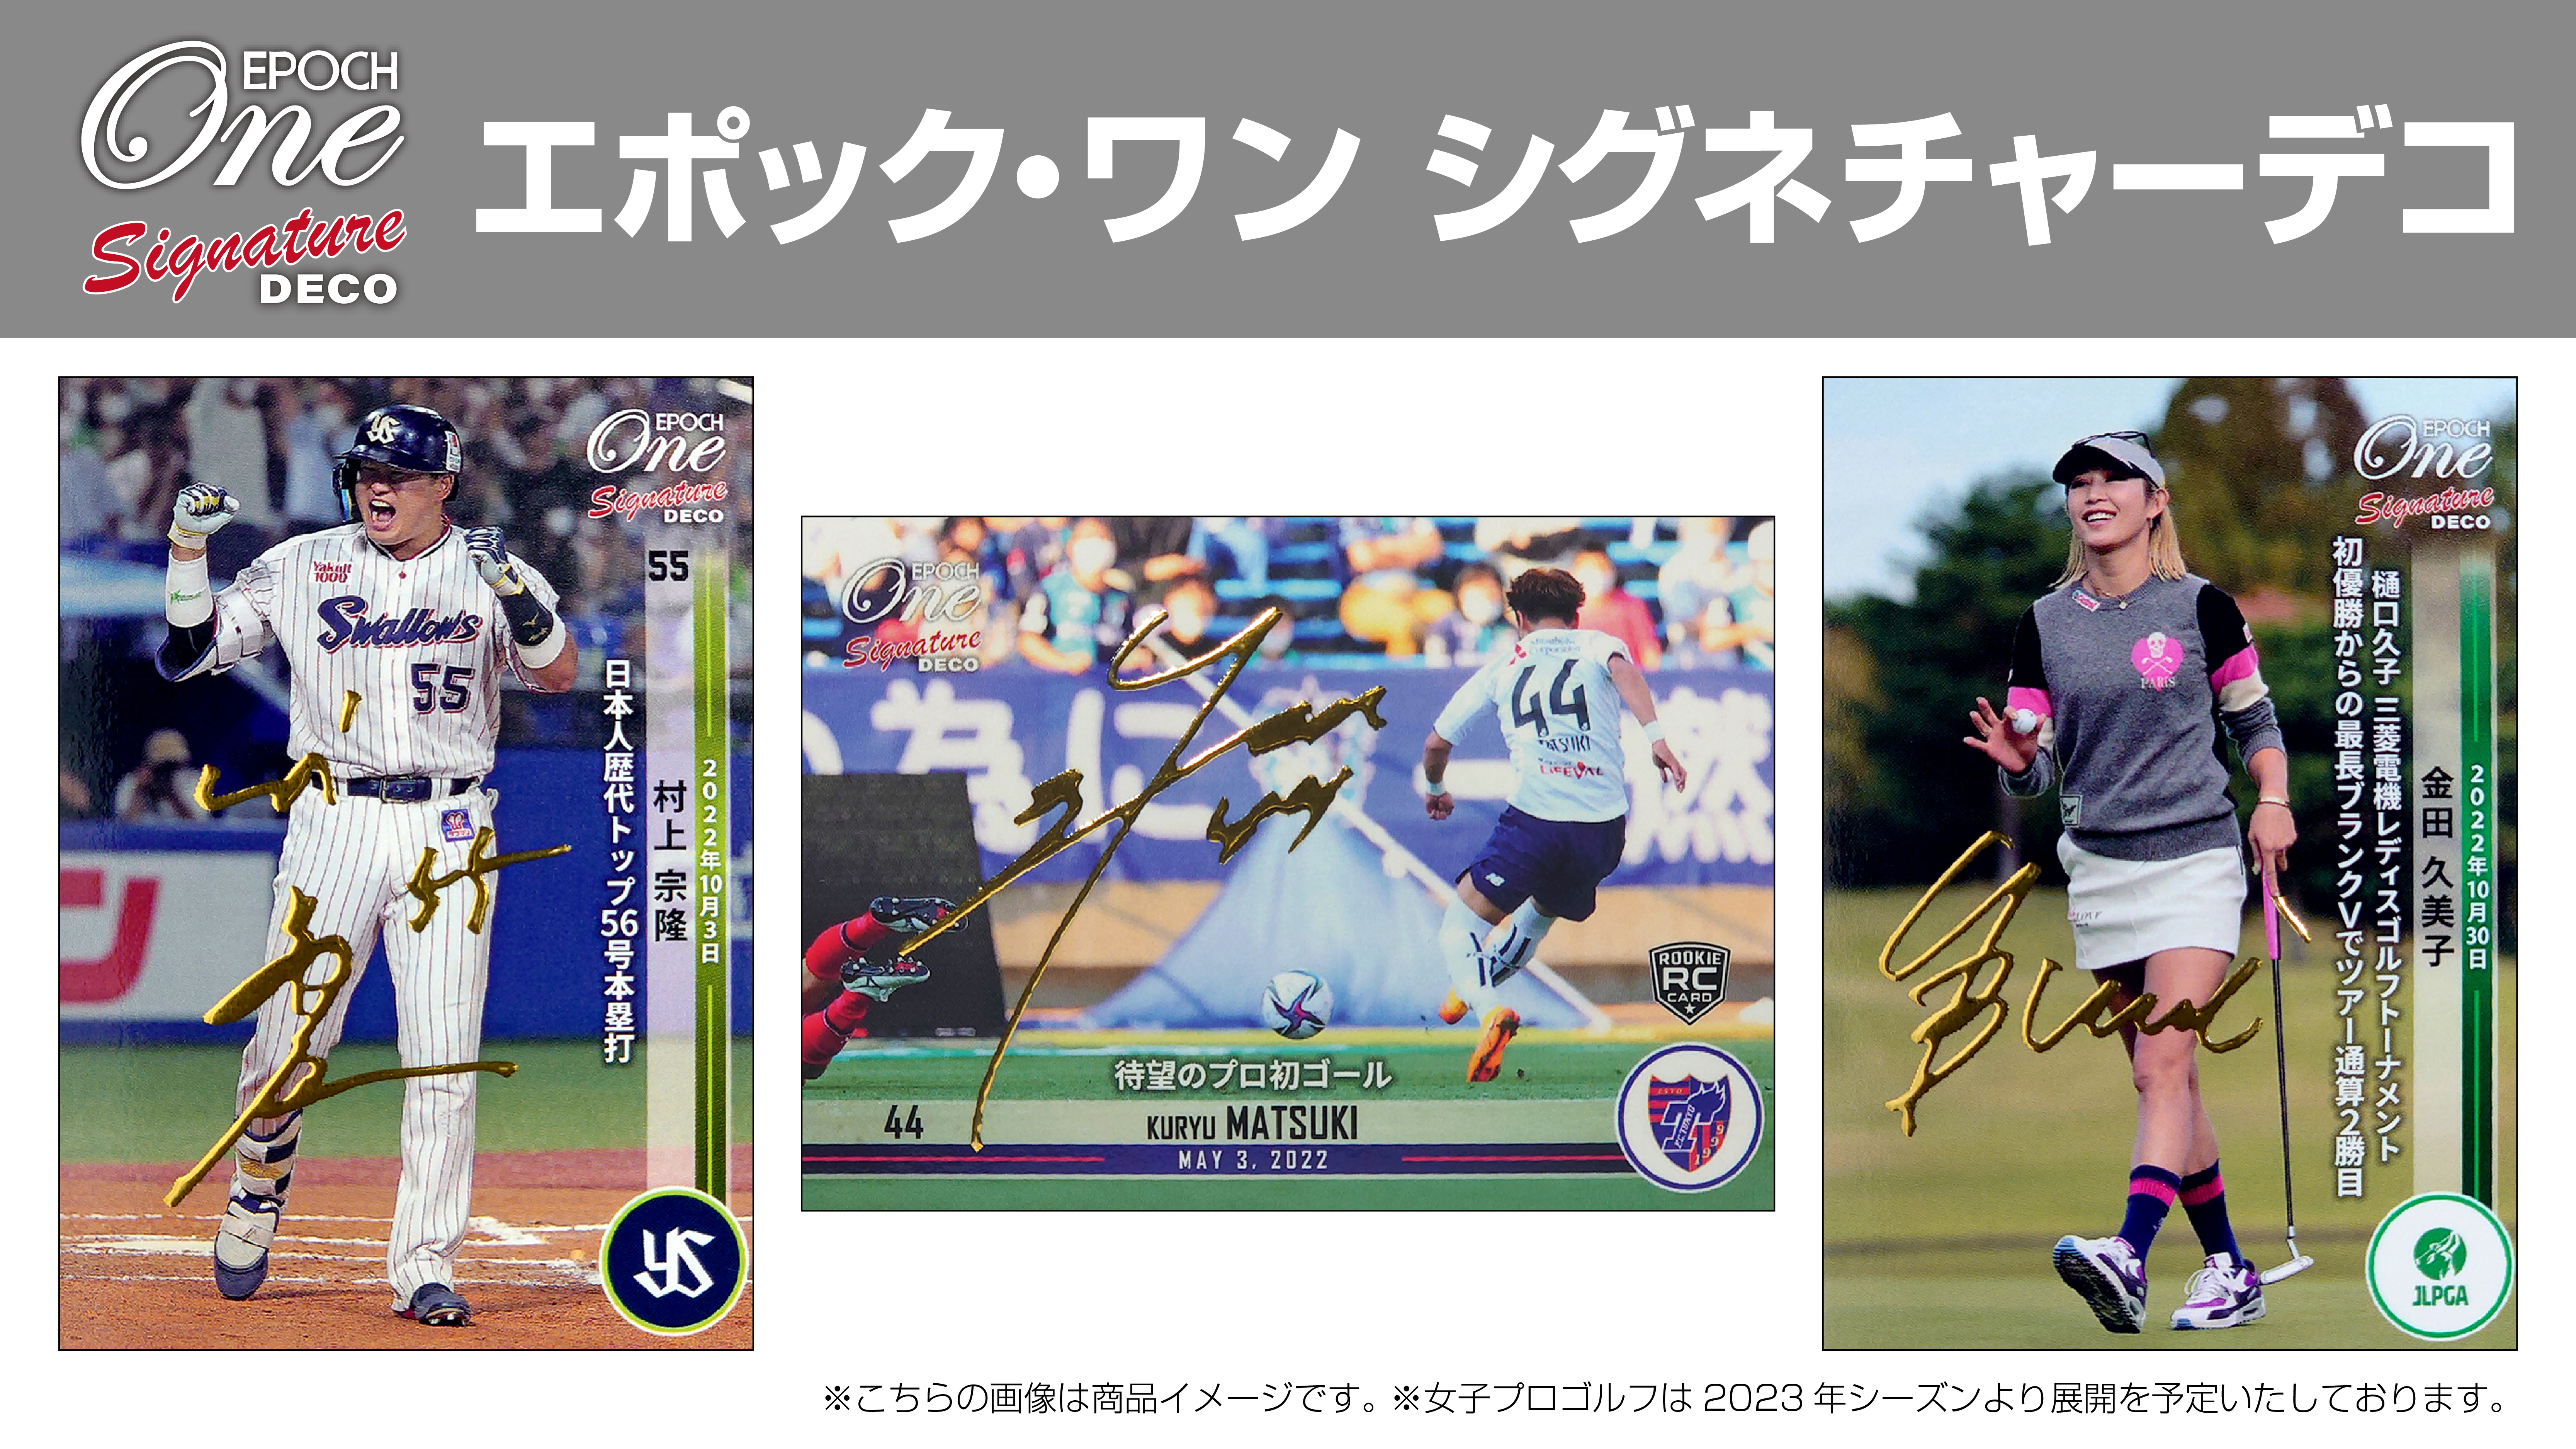 ※Signature DECO 【吉田優利】PLAY OF THE MONTH -THE BEST PLAY OF MAY-（23.6.19）